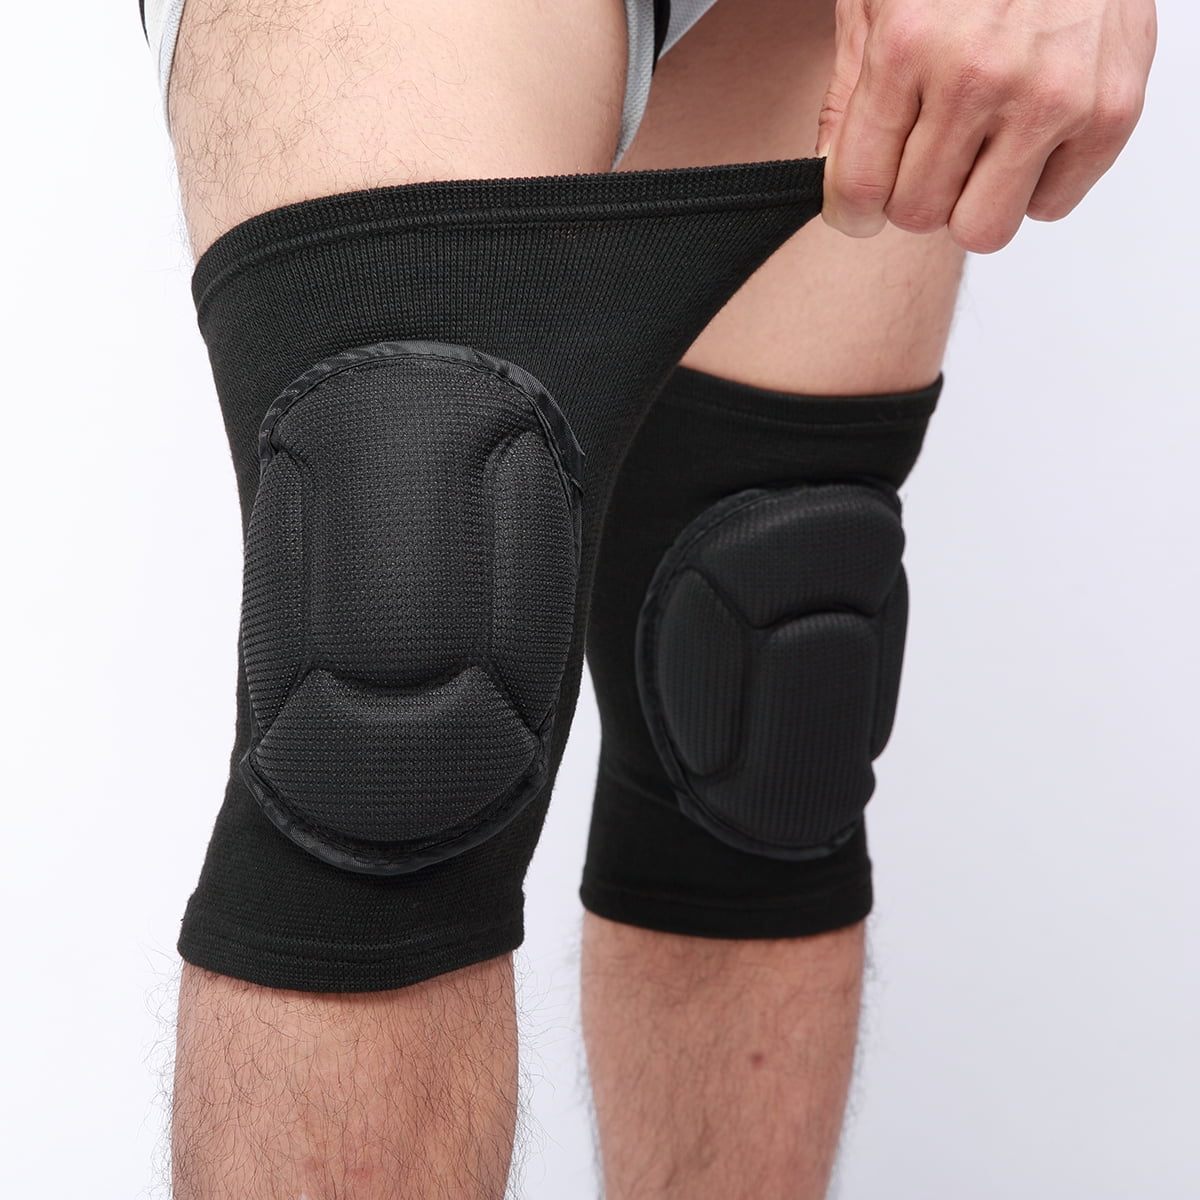 2Pcs Knee Pads Kneelet Construction Professional Work Sport Safety Leg Protector 